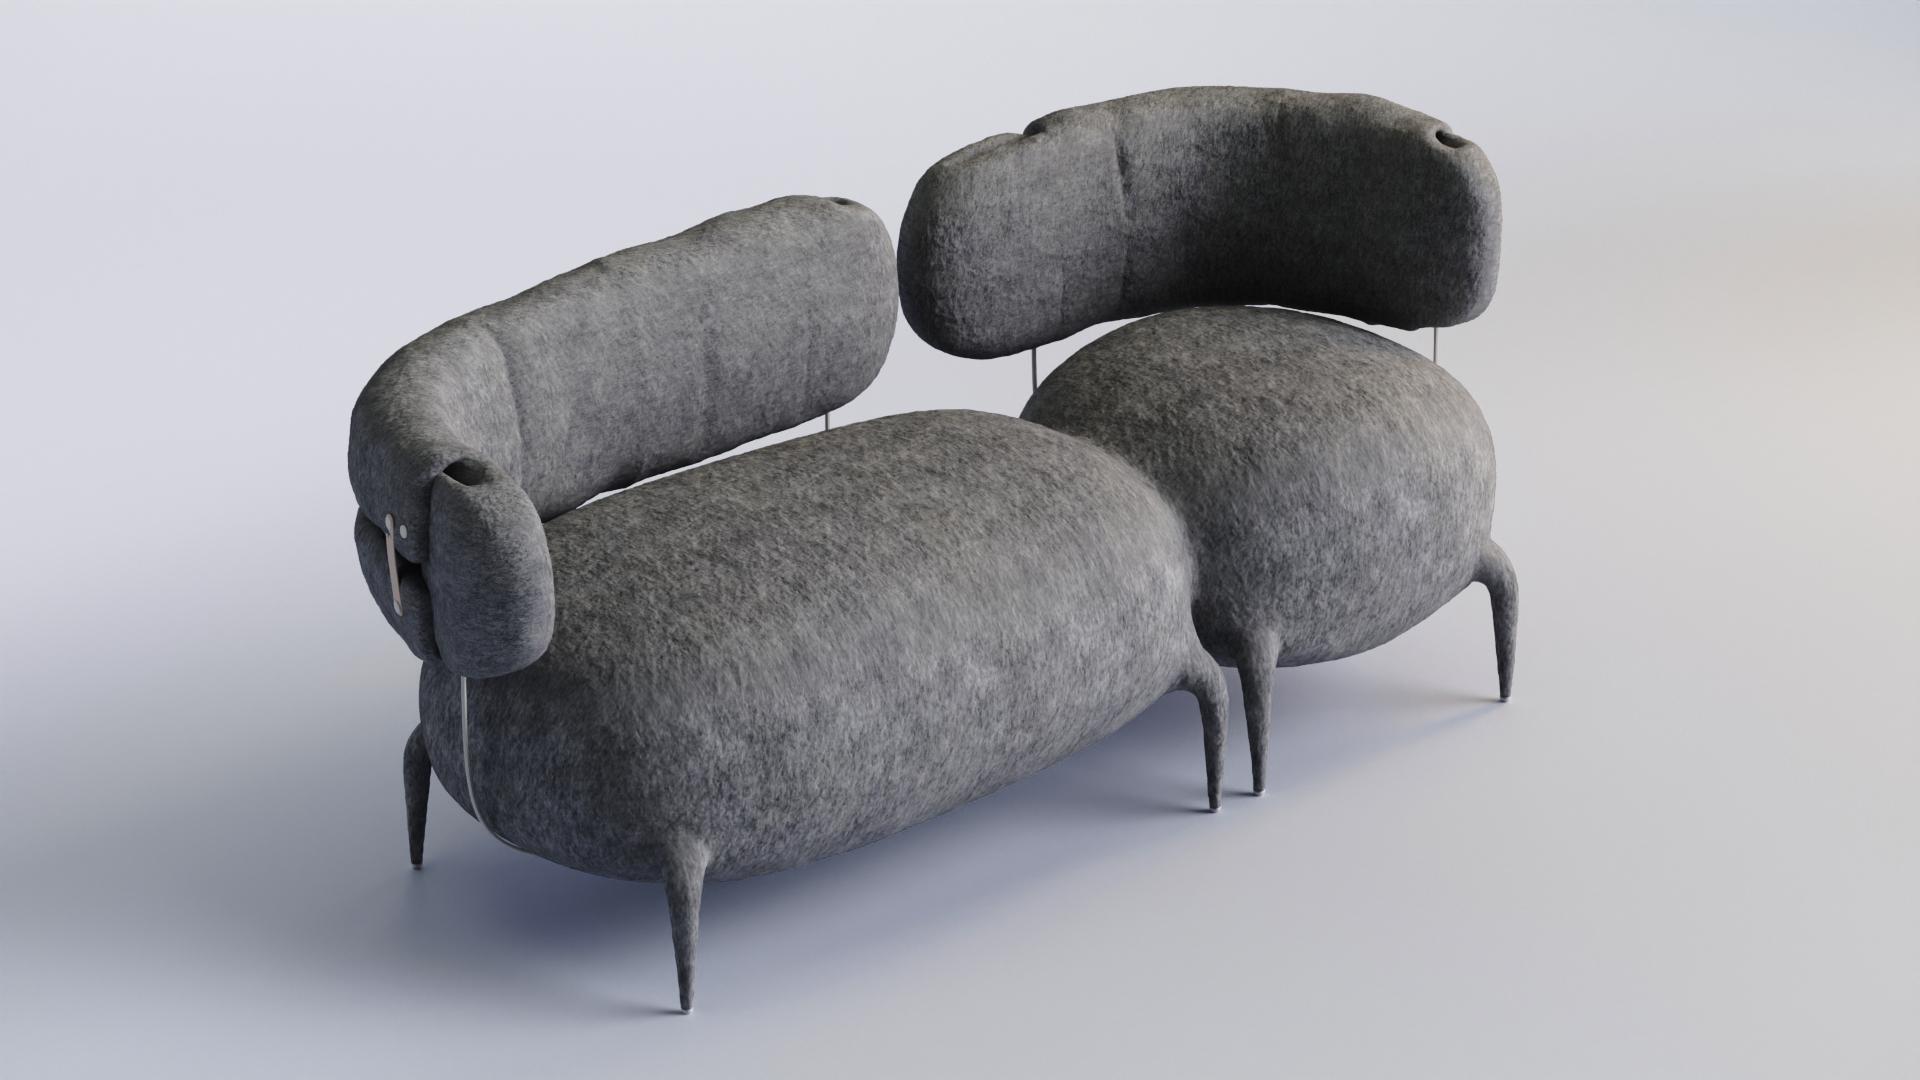 Lympho Contemporary Sofa by Taras Zheltyshev
Dimensions: 82 x 200 x 82 cm
Materials: Felt, Wood, Metal

This unique project is part of the “microworld” collection and
represents an image of a biological cell designed for obvious
interior use. The